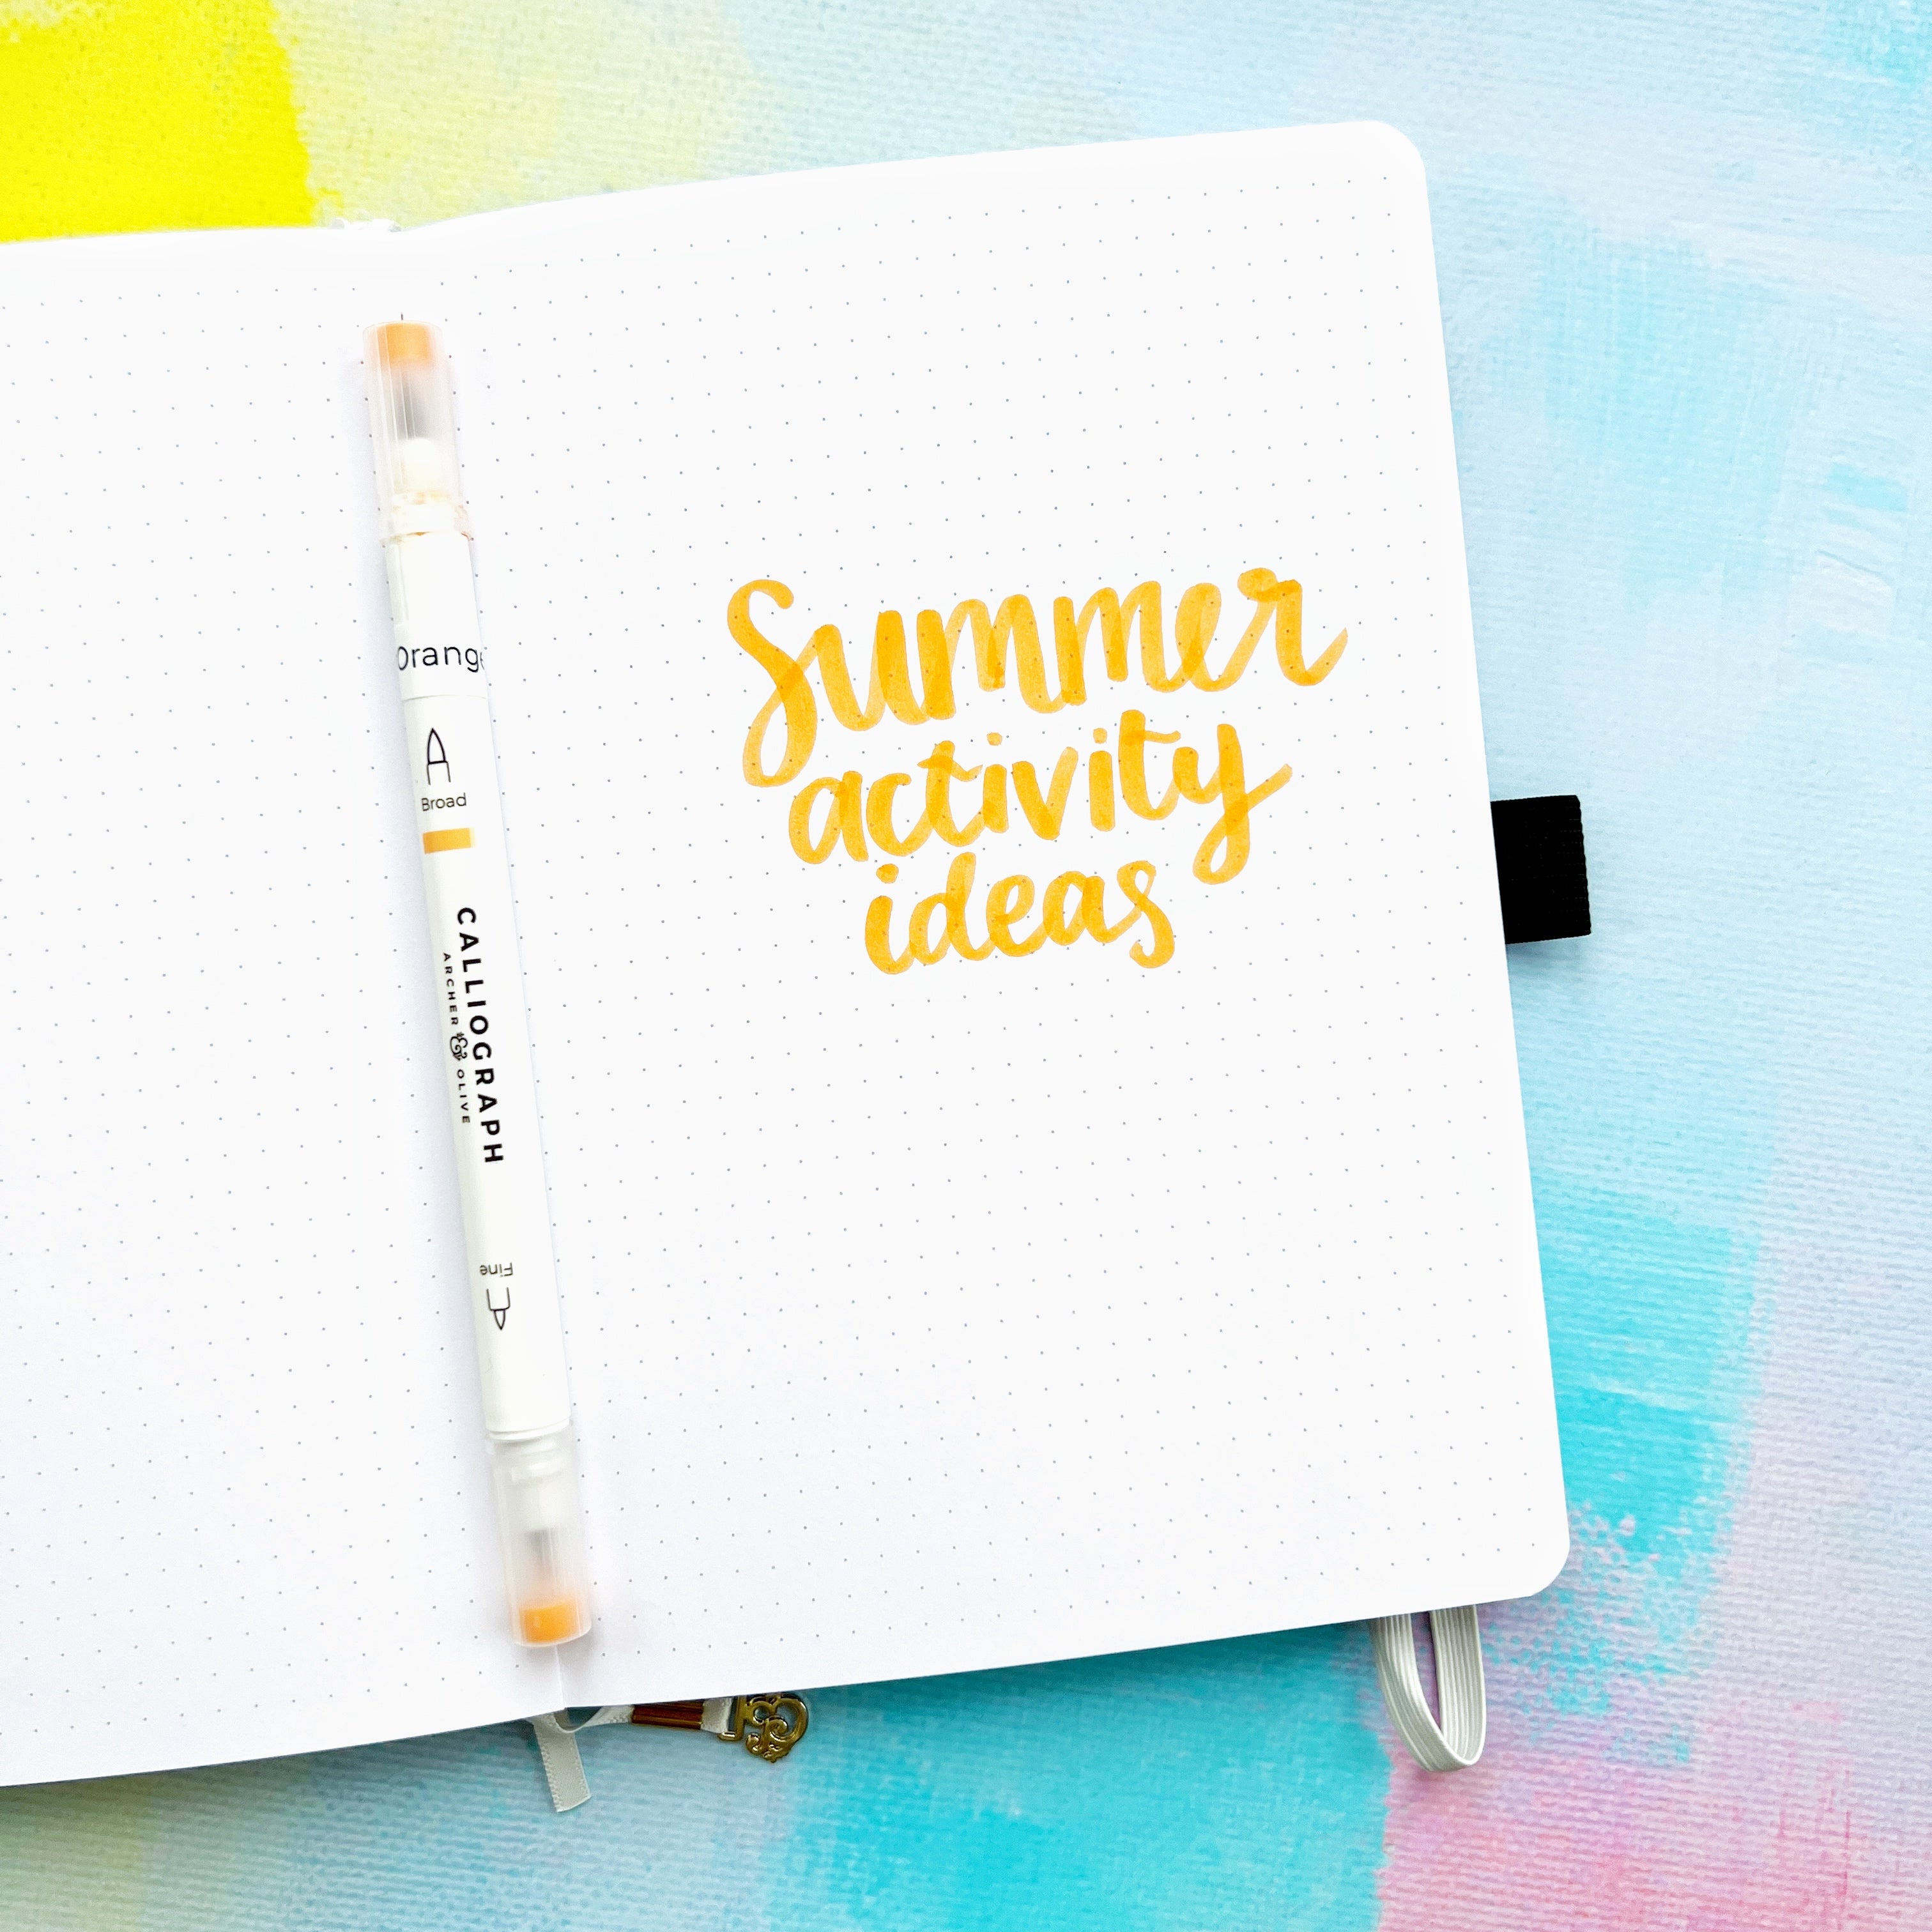 Summer Activity Ideas title on open journal page with orange brush pen